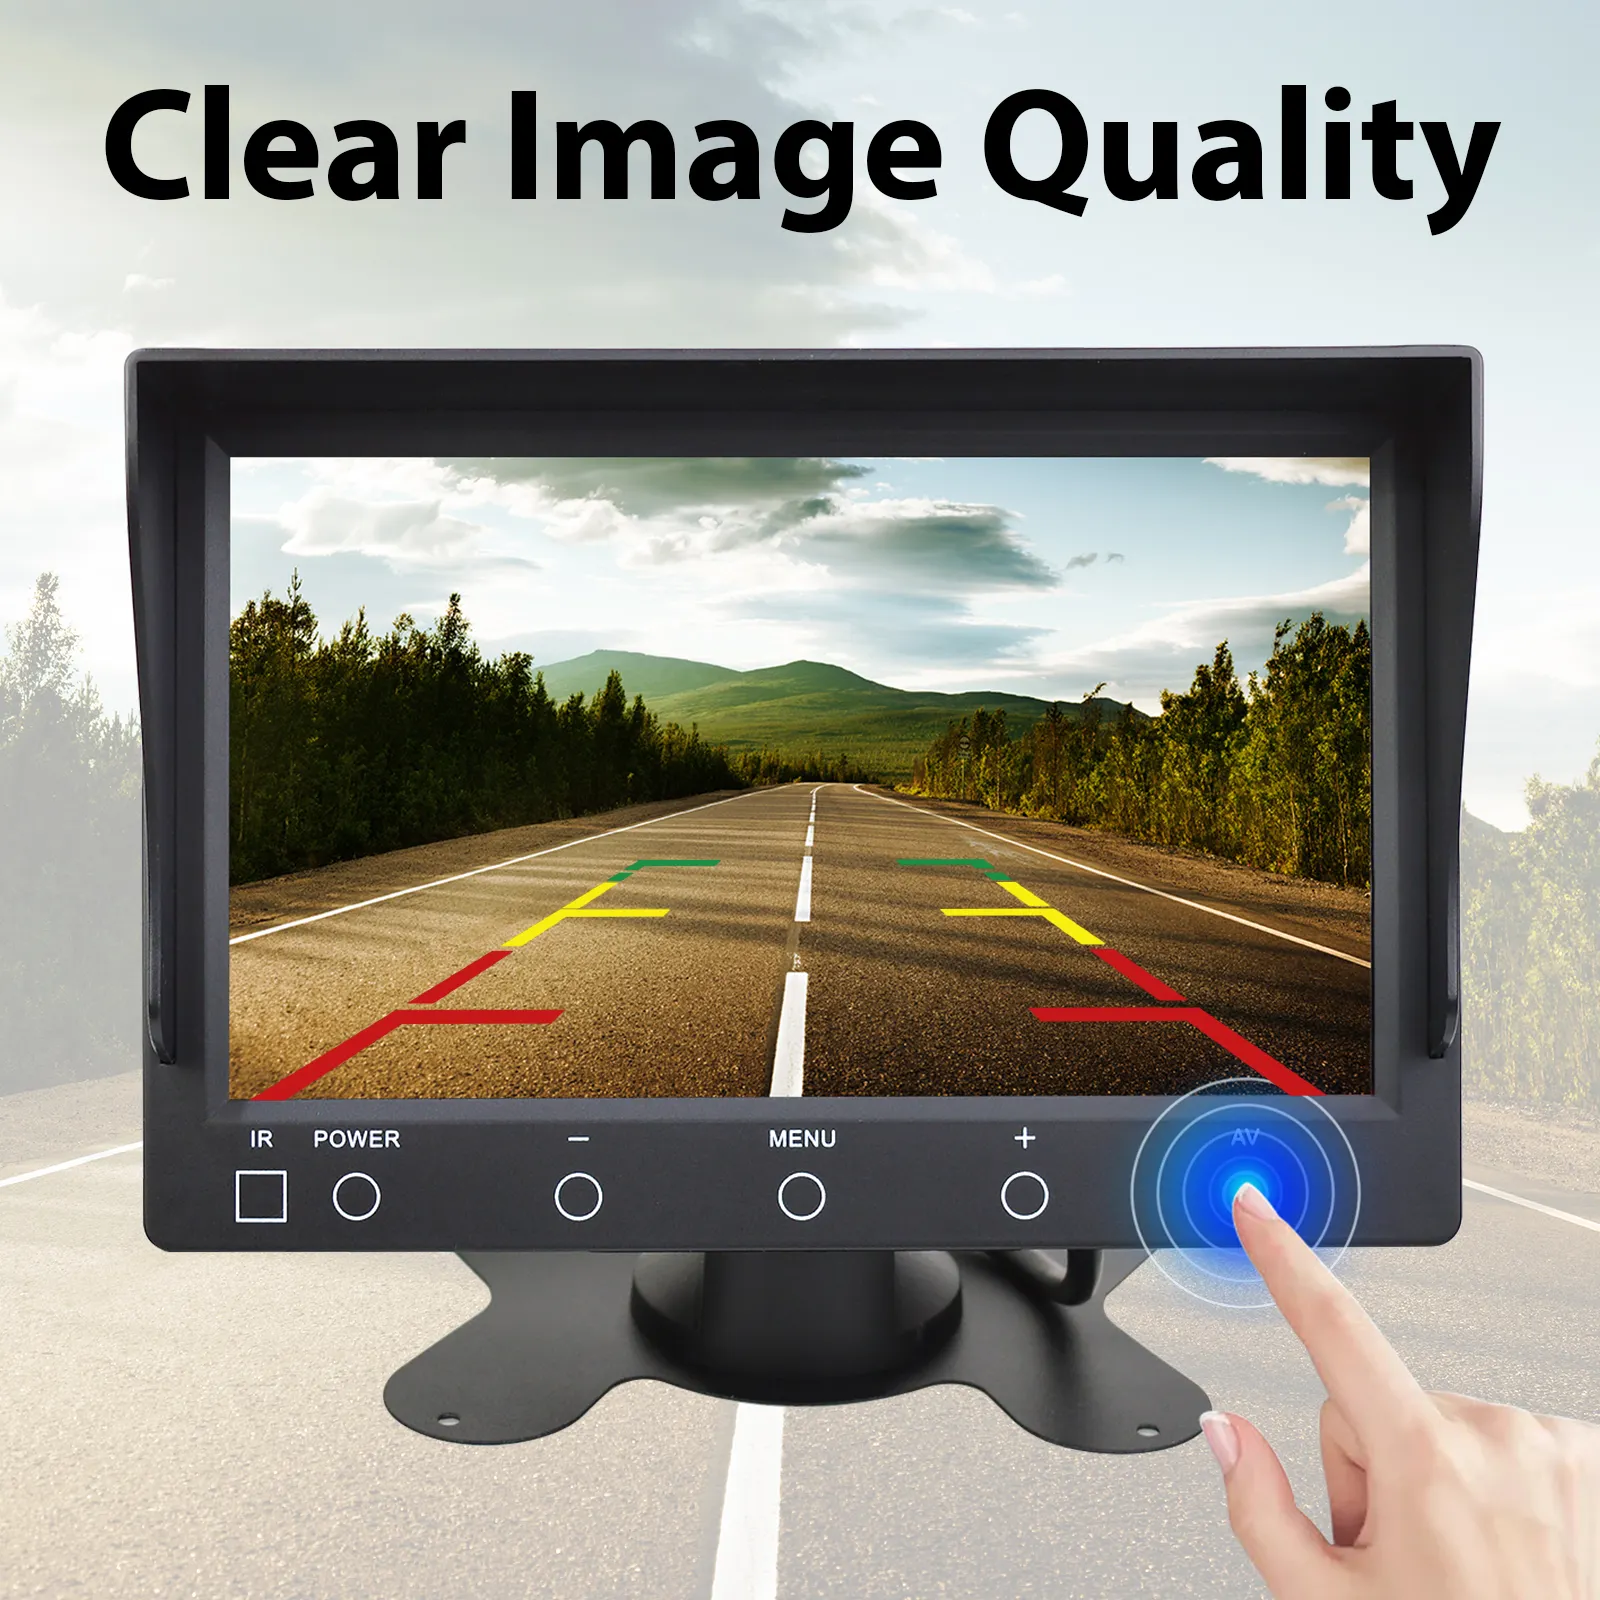 7 Inch Car TFT LCD Screen Monitor Touch Button CVBS Input Vehicle Monitor for Heavy Duty Truck RV Trailer Van Bus